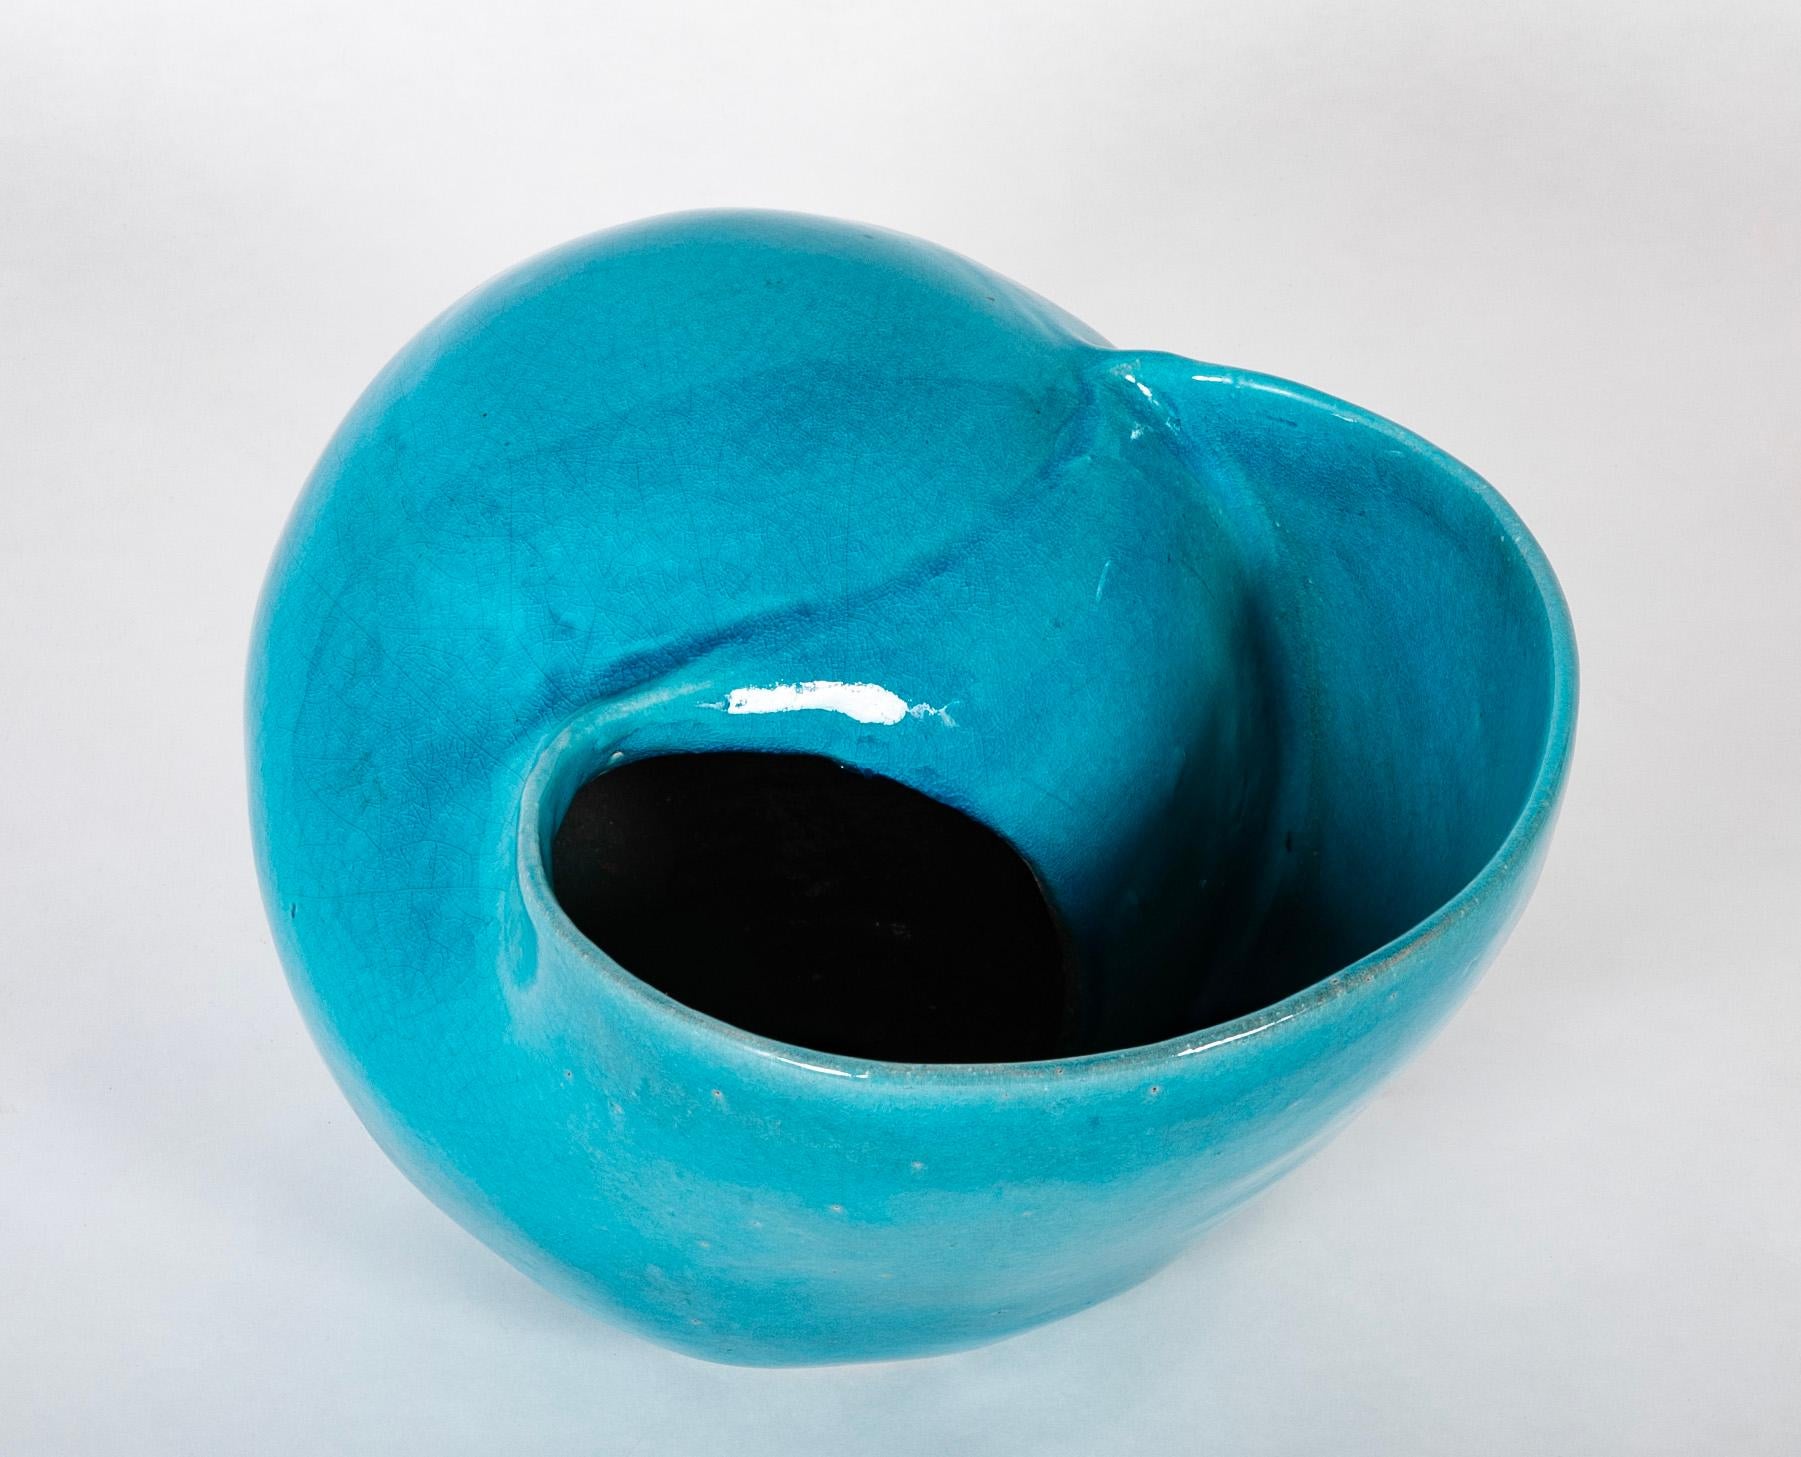 Turquoise Blue Glazed Sea Shell Vase Jardiniere Planter, Large Scale For Sale 3